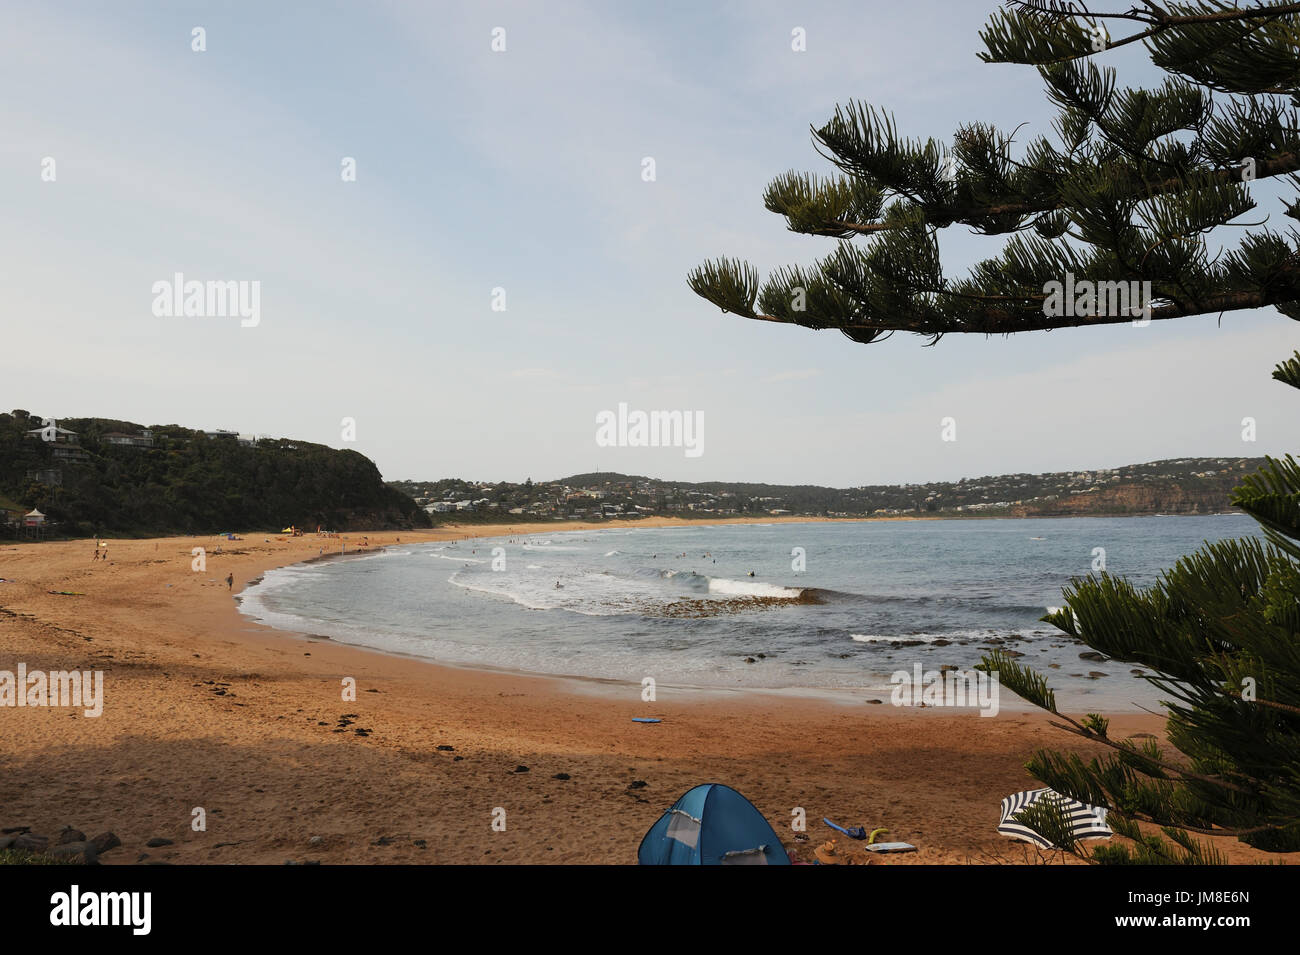 View of Macmasters Beach with people swimming, lazing about in tent. Macmasters Beach. New South Wales. AUSTRALIA Stock Photo